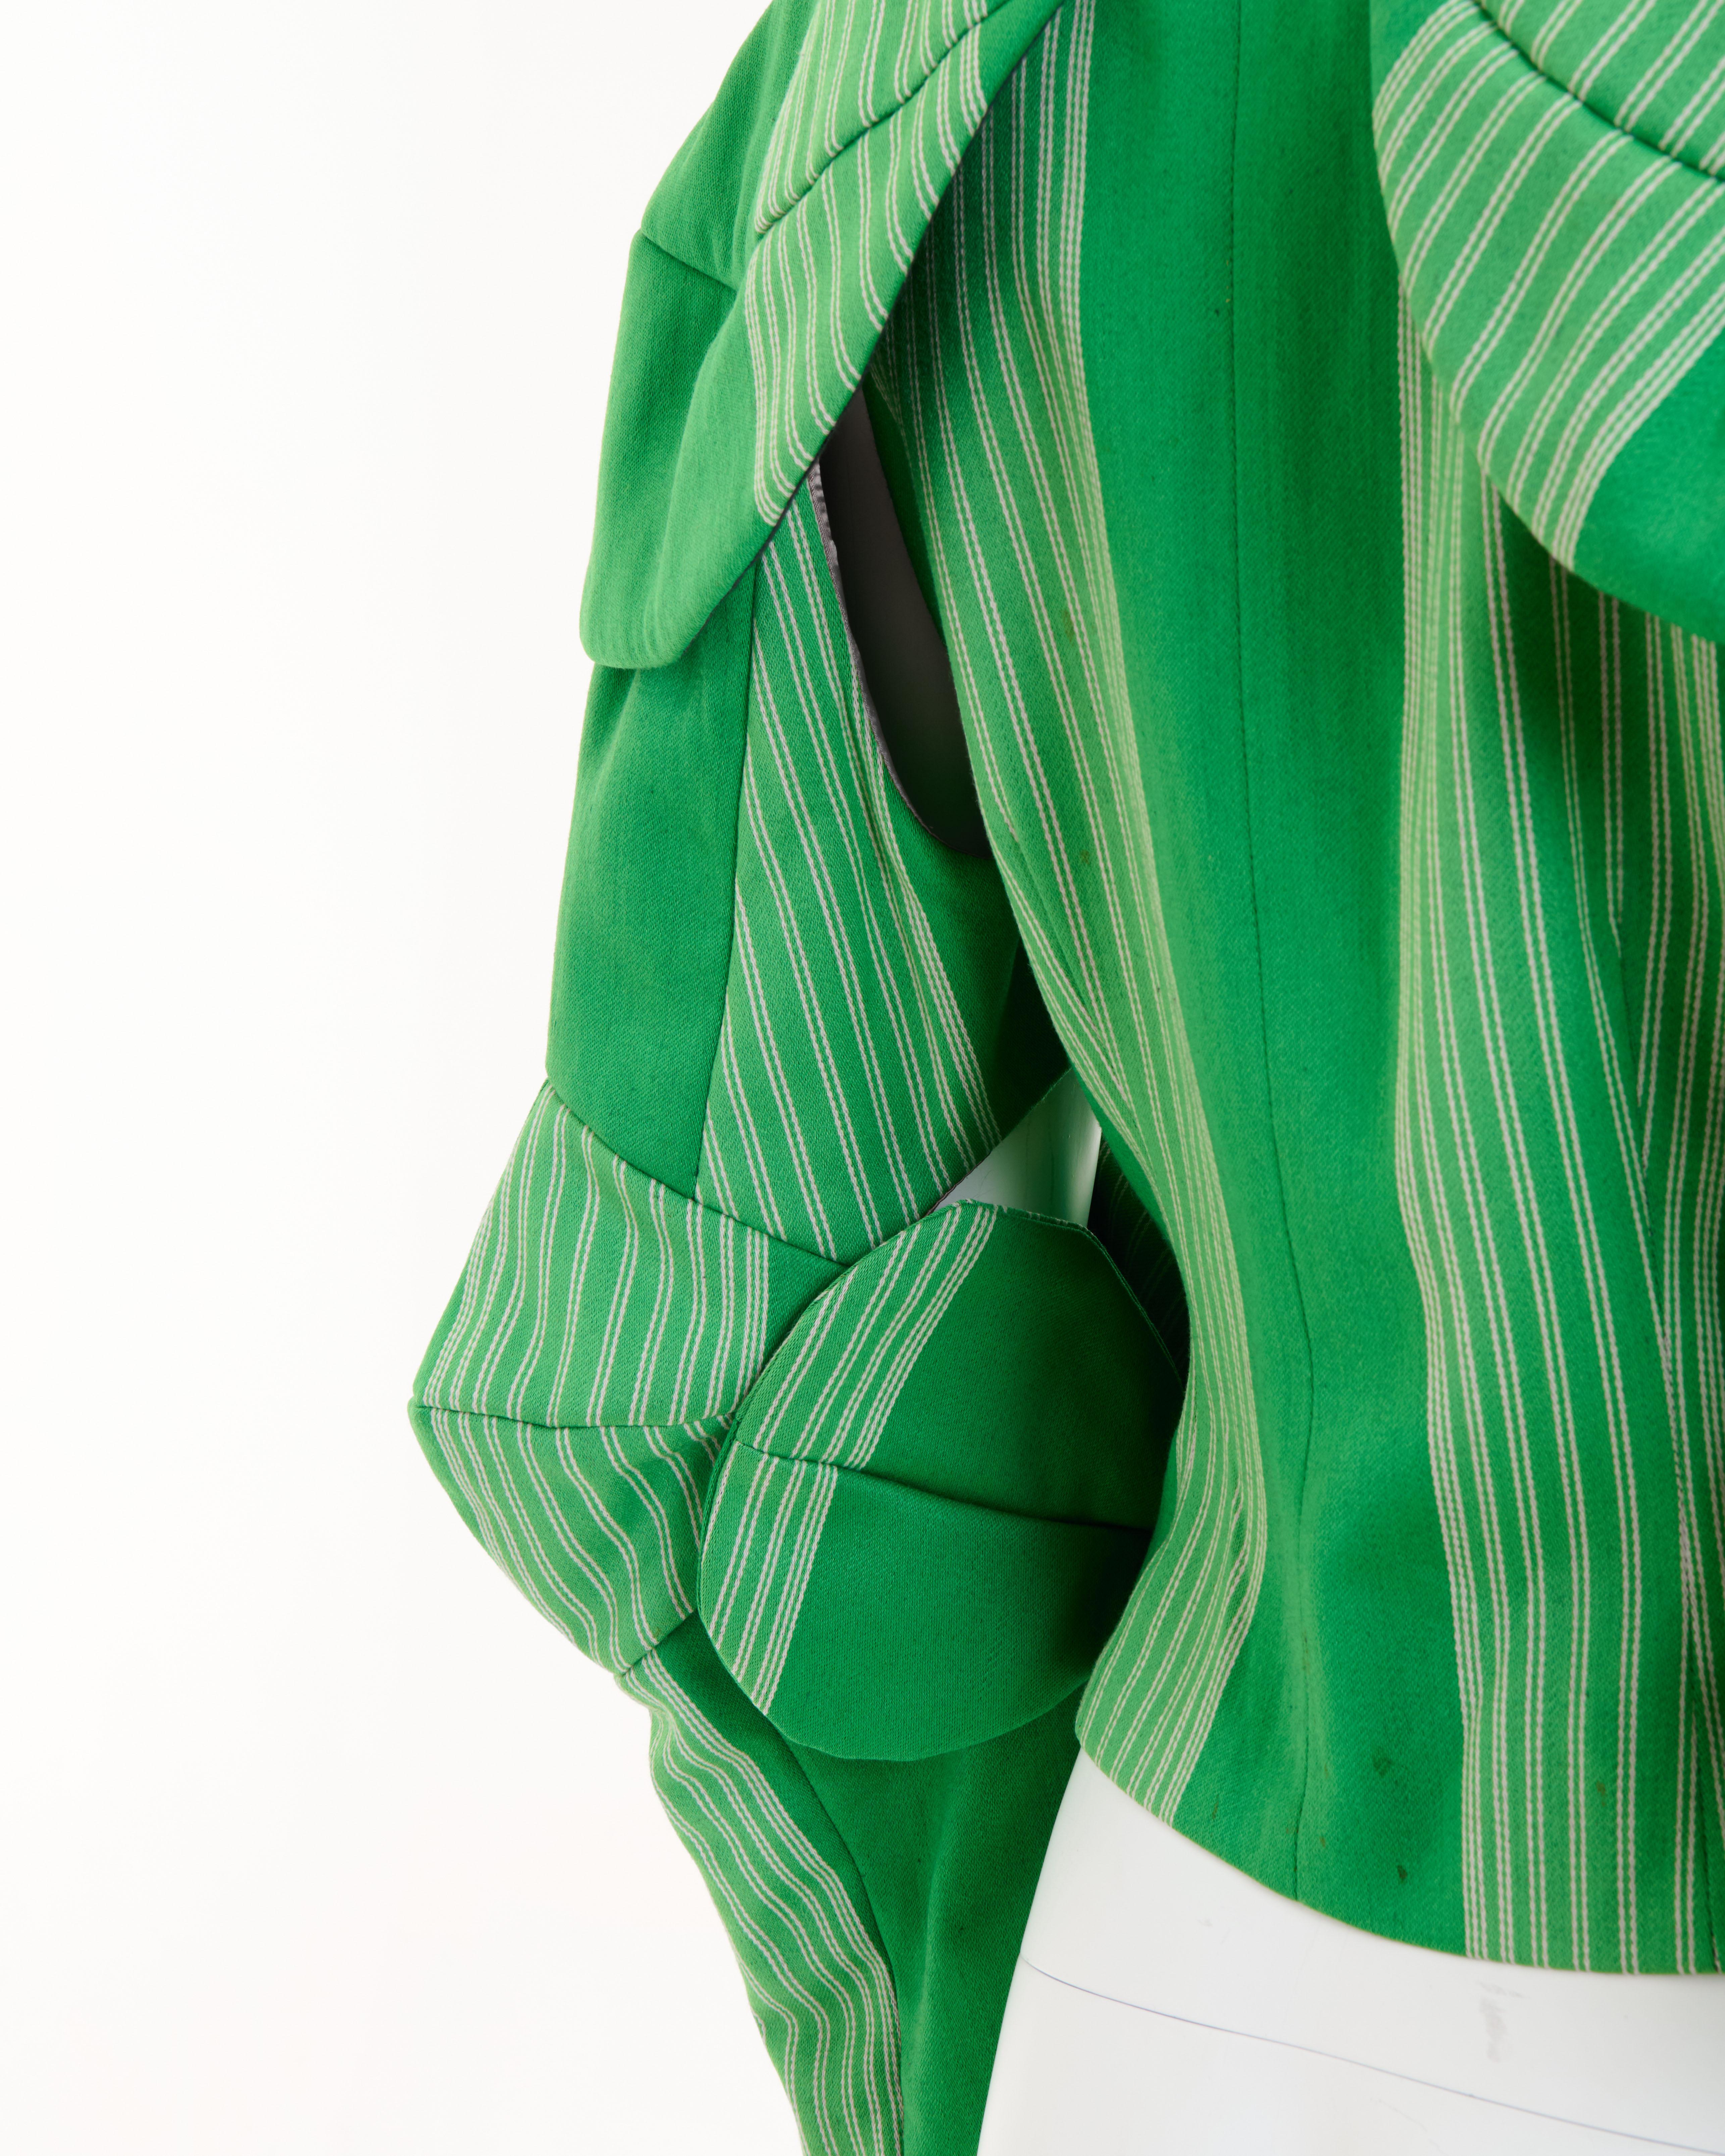 Vivienne Westwood  F/W 1988/89 ‘Time Machine’ Green striped Armour jacket For Sale 2